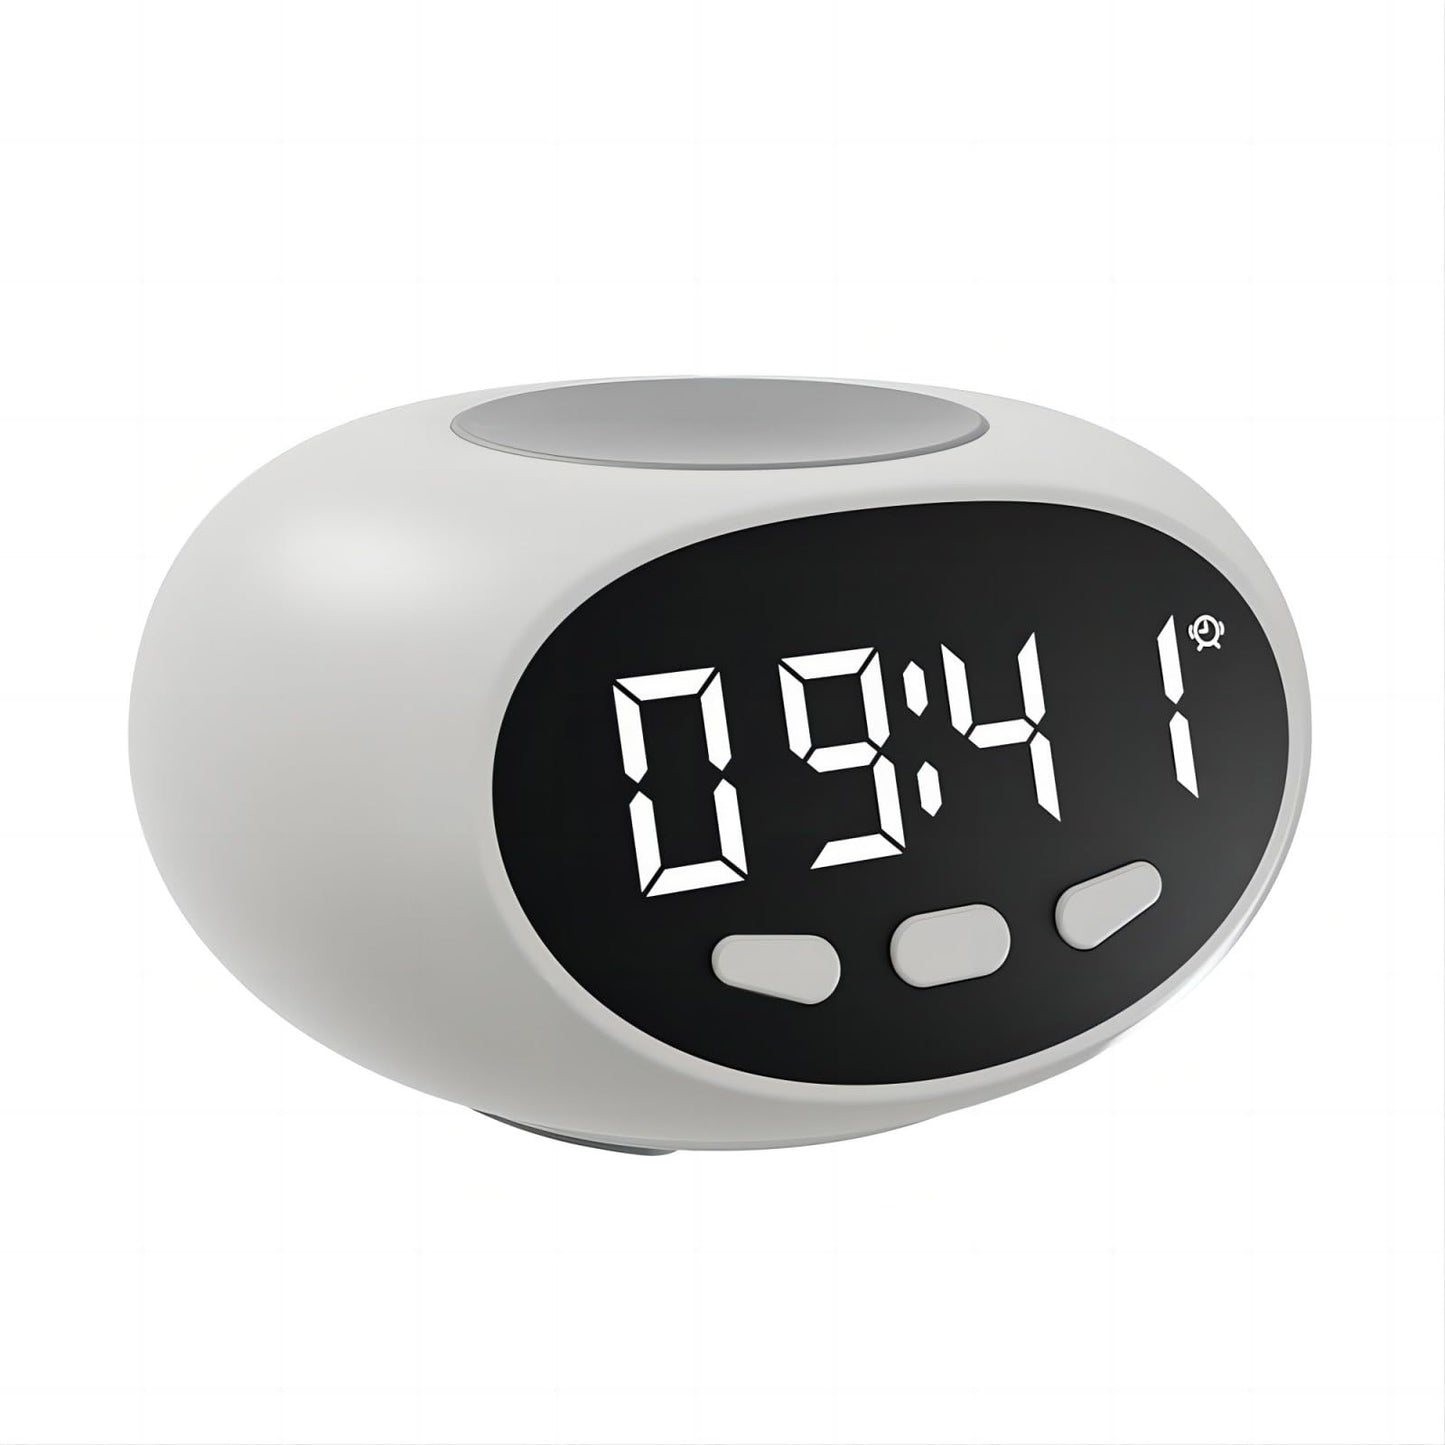 HEROSS Talking Alarm Clock - Extra Loud Time and Date - Talking Clock for Kids, Elderly, Dementia, Hearing or Visually Impaired Seniors - Easy to Use Speaking Clock（White）